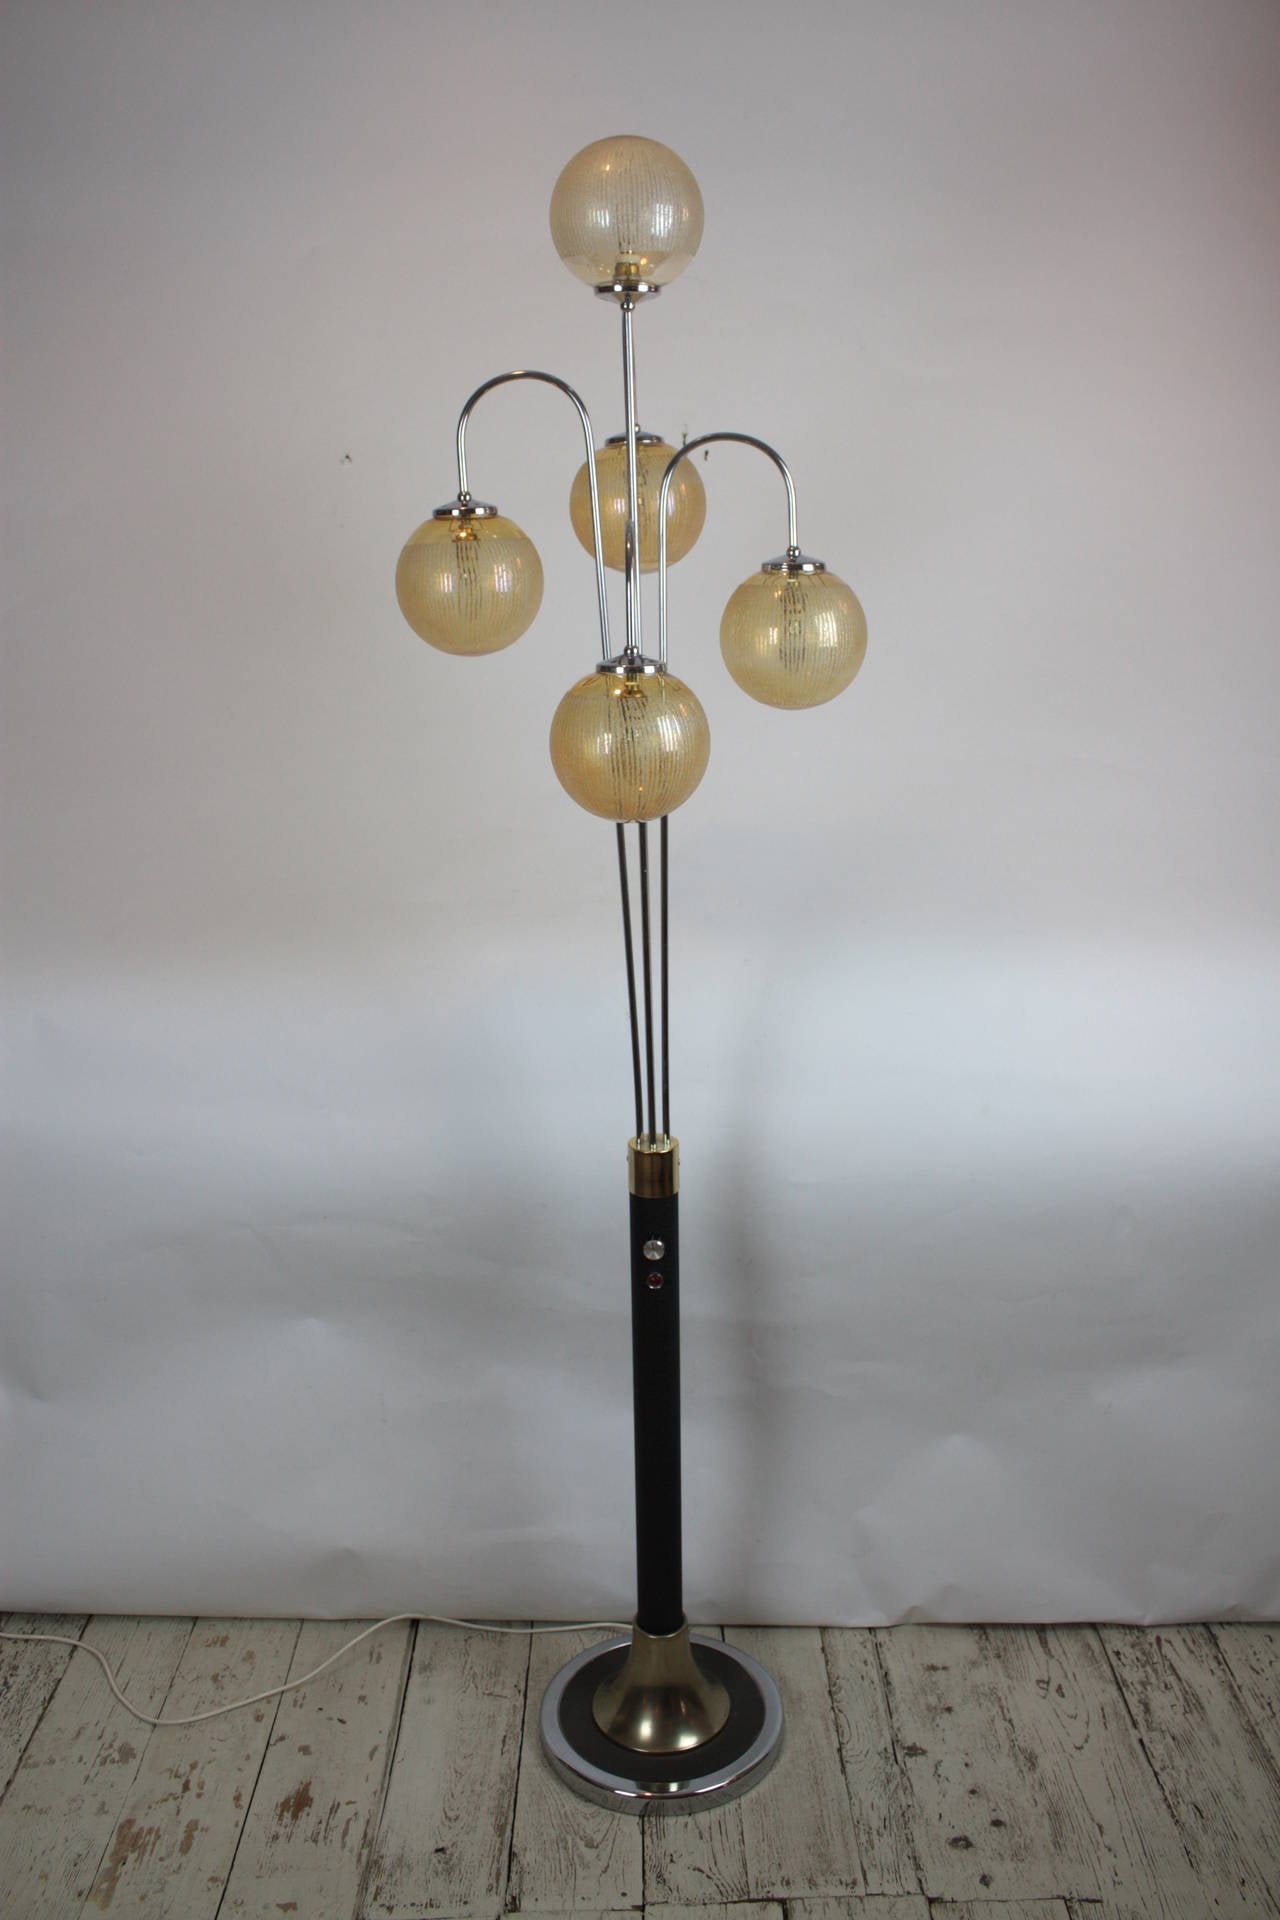 Mid-Century Modern standing lamp with lacquered metal and chrome base and amber engraved glass globe lights. Spain, 1970s.
Measures: 168 cm H x  43 cm diameter.